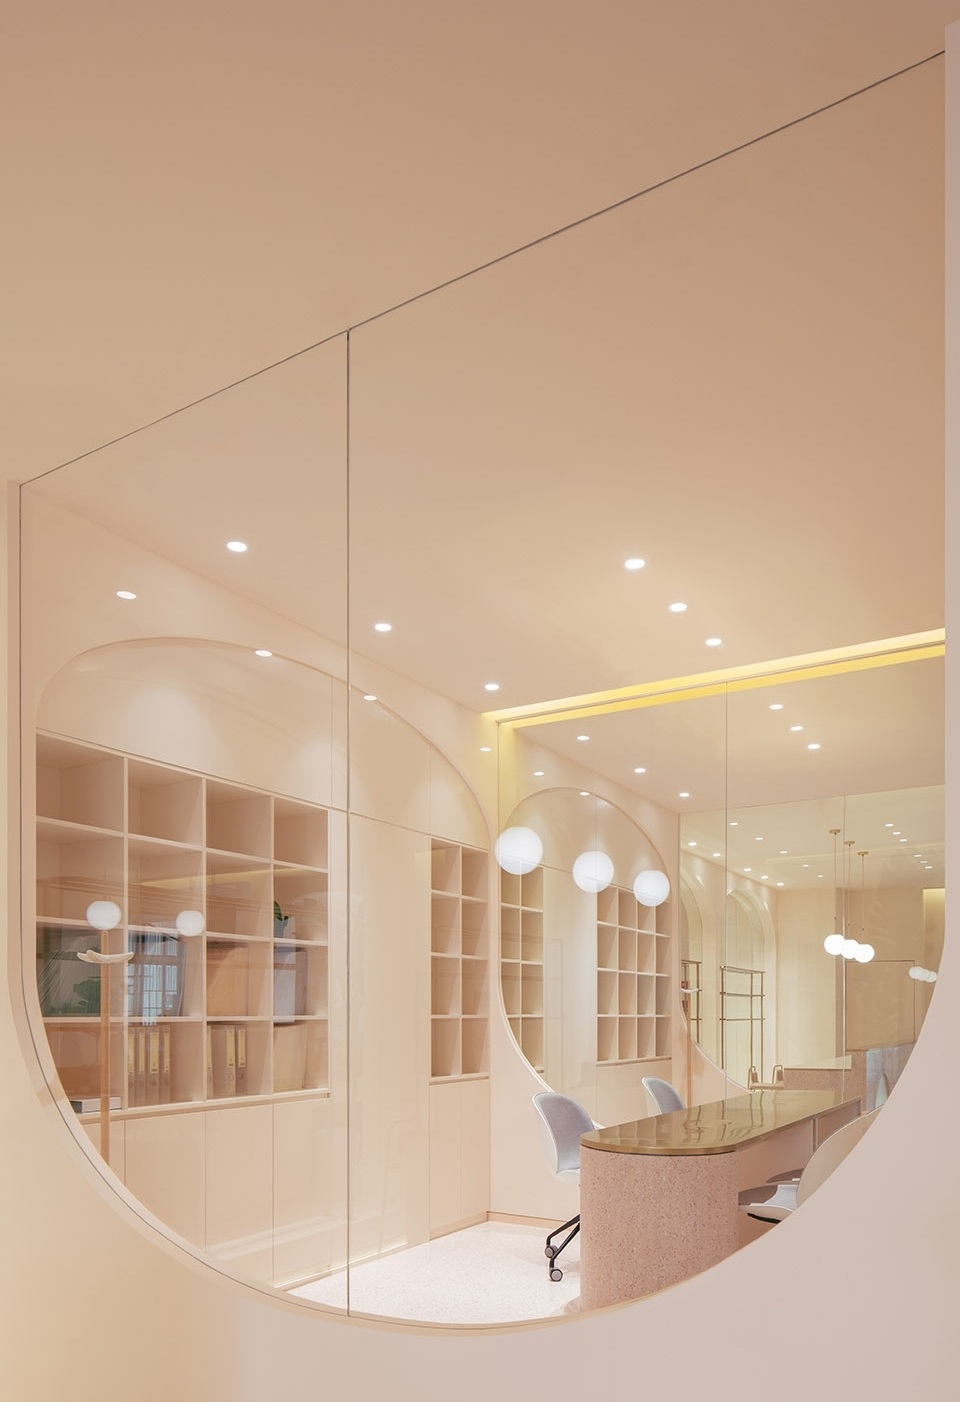 Reception design of Narcissus Beauty Chain Store